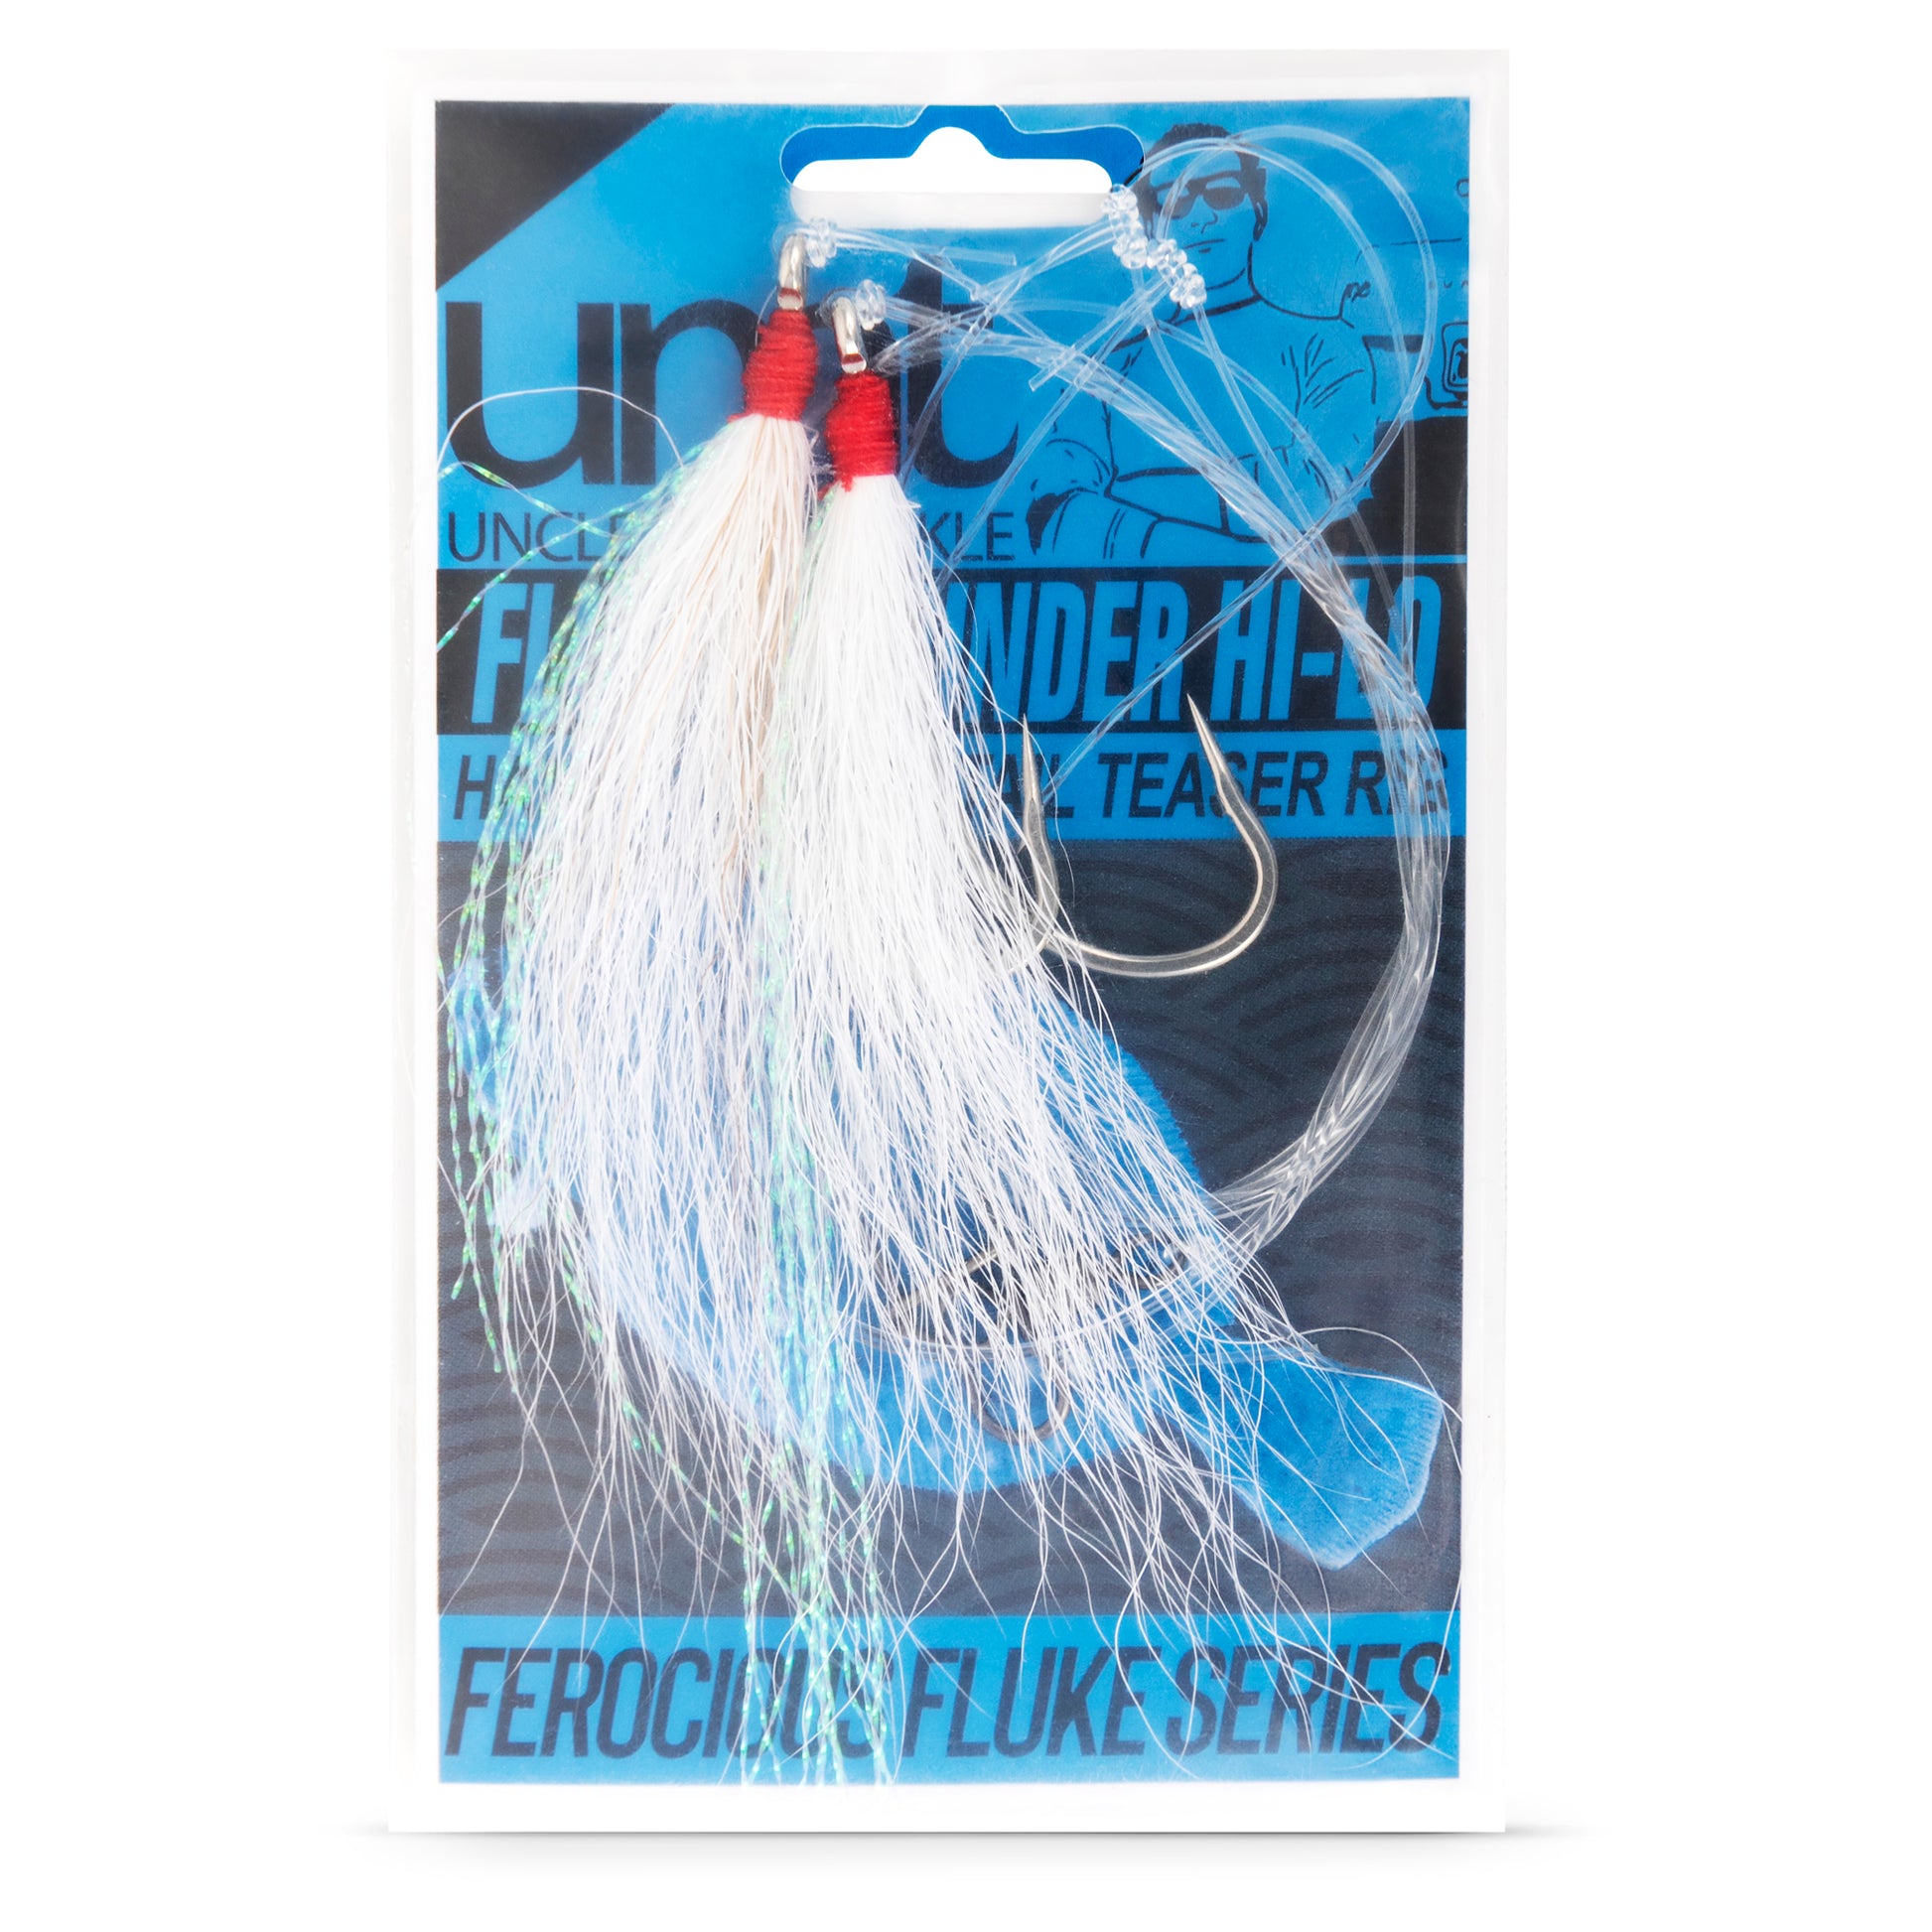 Uncle Mo’s Tackle - Fluke Flounder Ocean Fishing Rigs Hi/Lo Hey Now Rig –  BUCKTAIL Teaser Hook for Saltwater – Size 5/0 Hook - 40lb Heavy Duty Mono